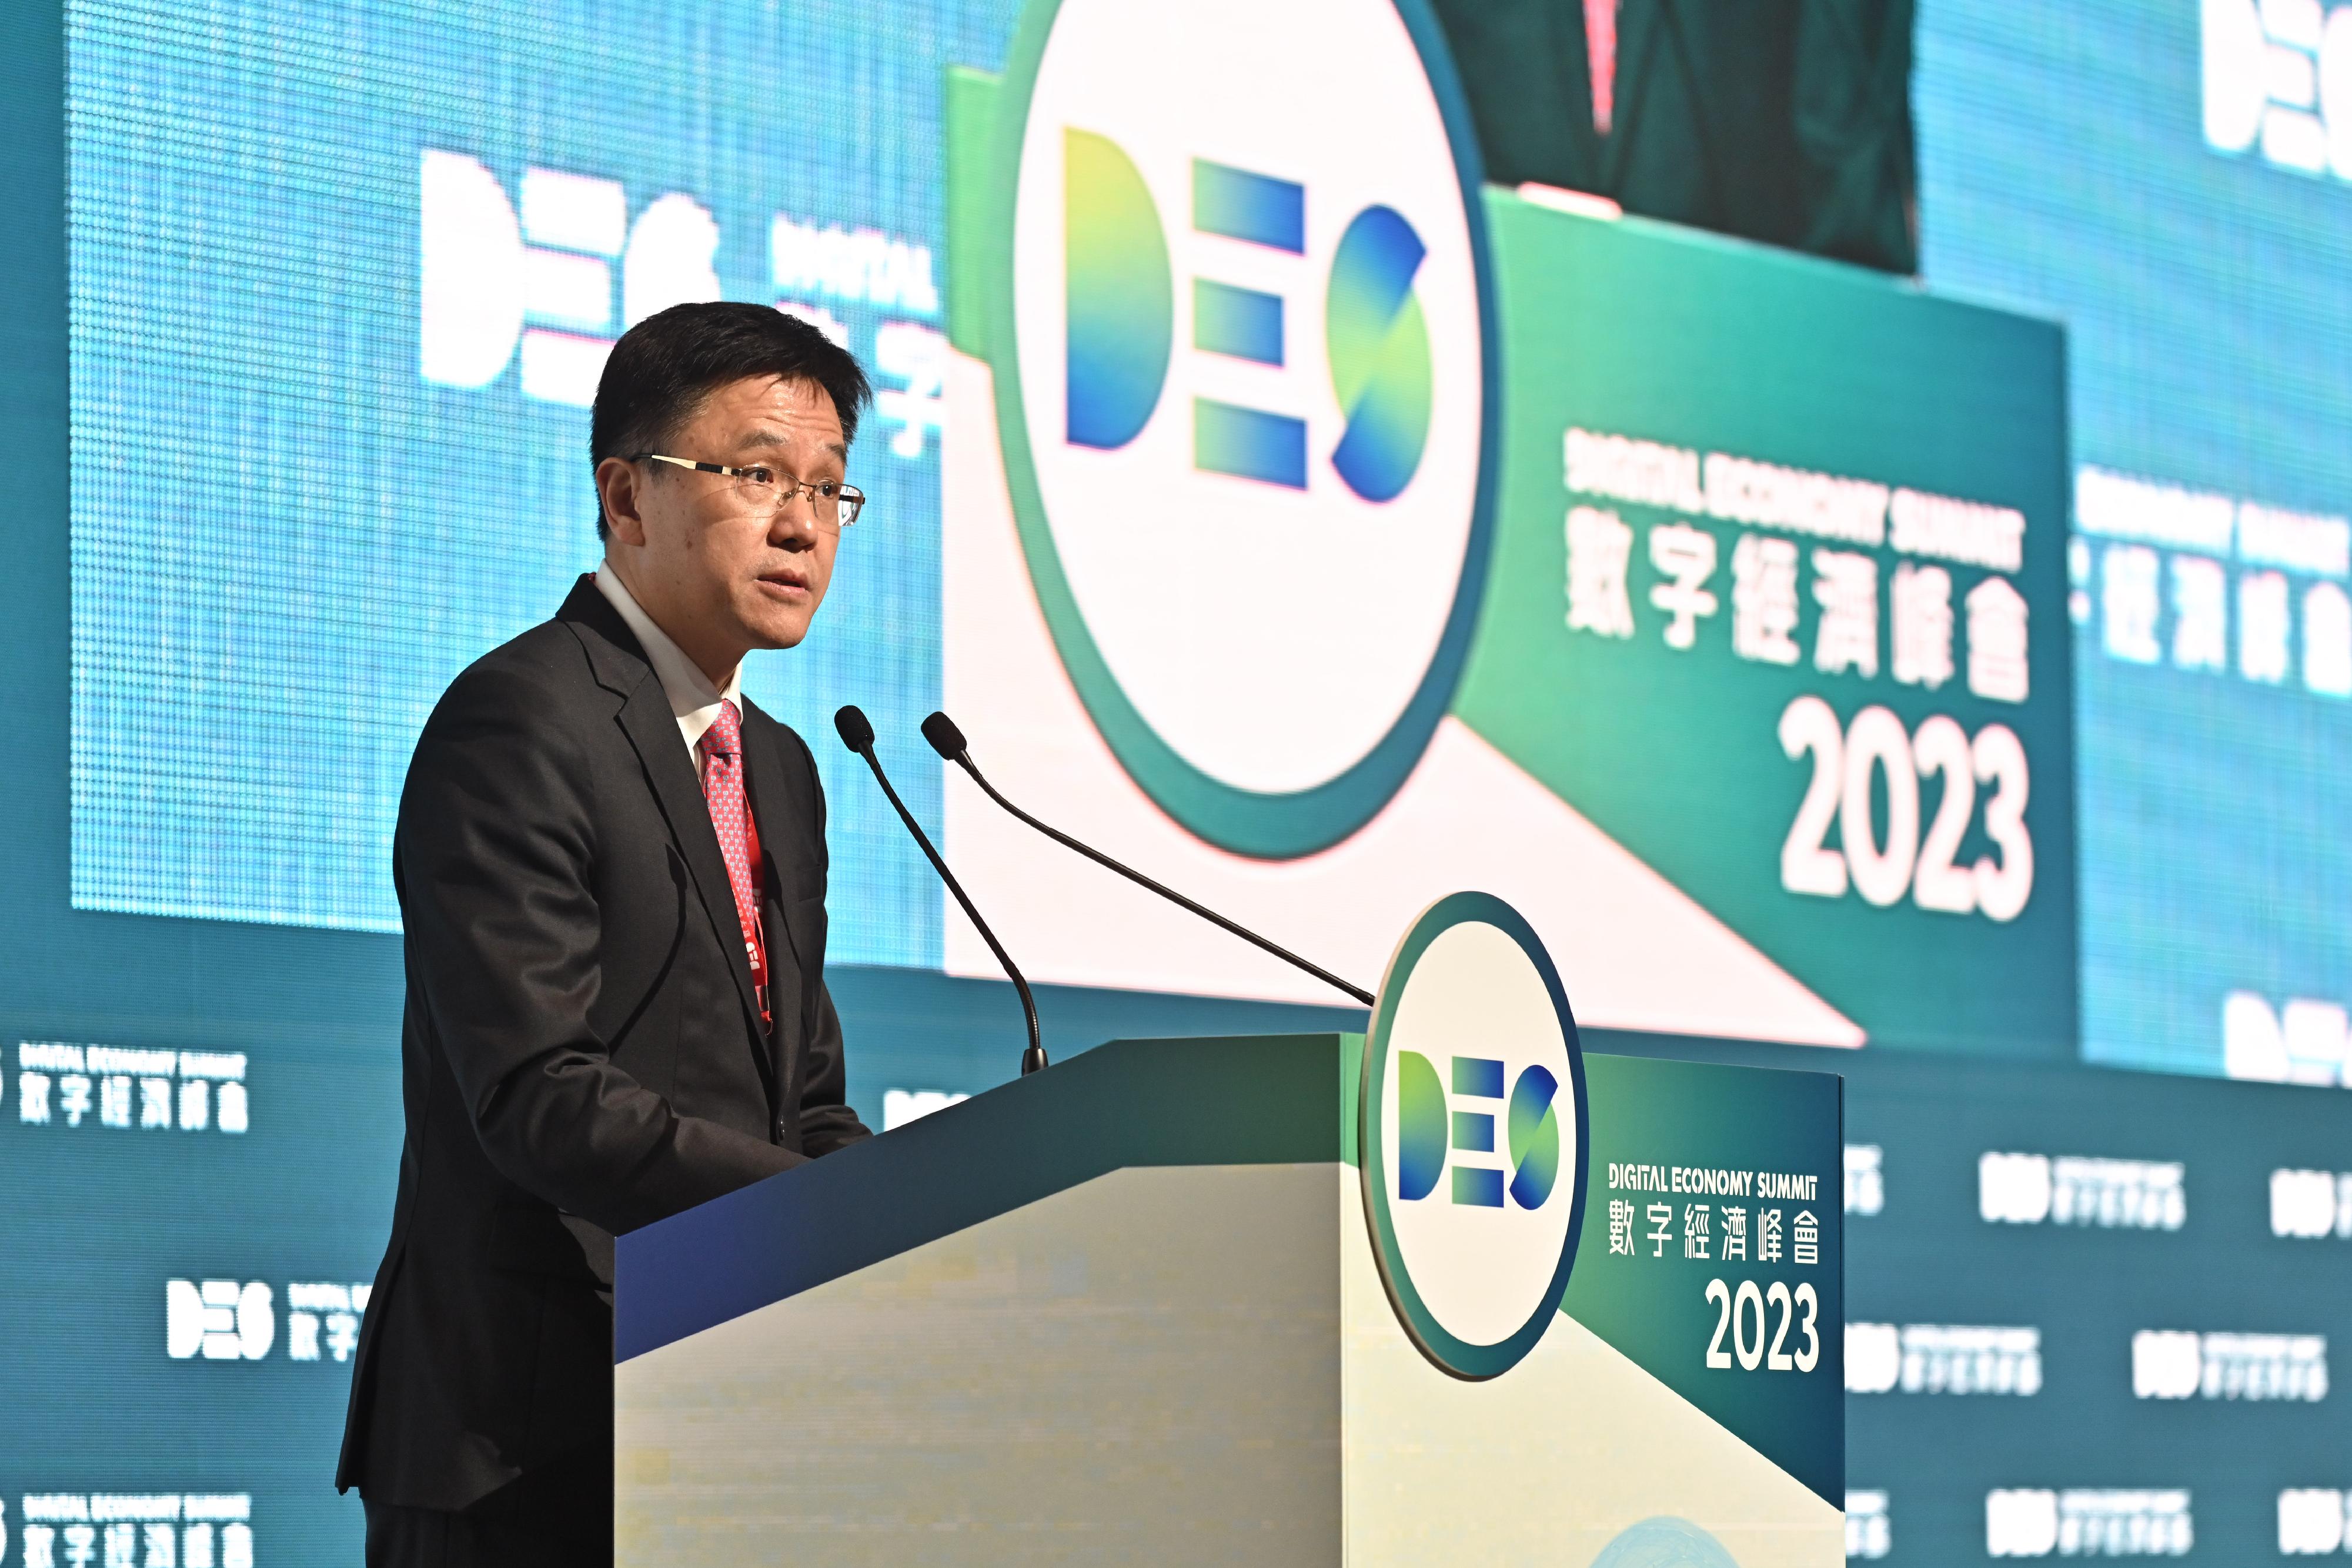 The Secretary for Innovation, Technology and Industry, Professor Sun Dong, delivers his welcome remarks at the Visionary Forum of the Digital Economy Summit 2023 today (April 13).